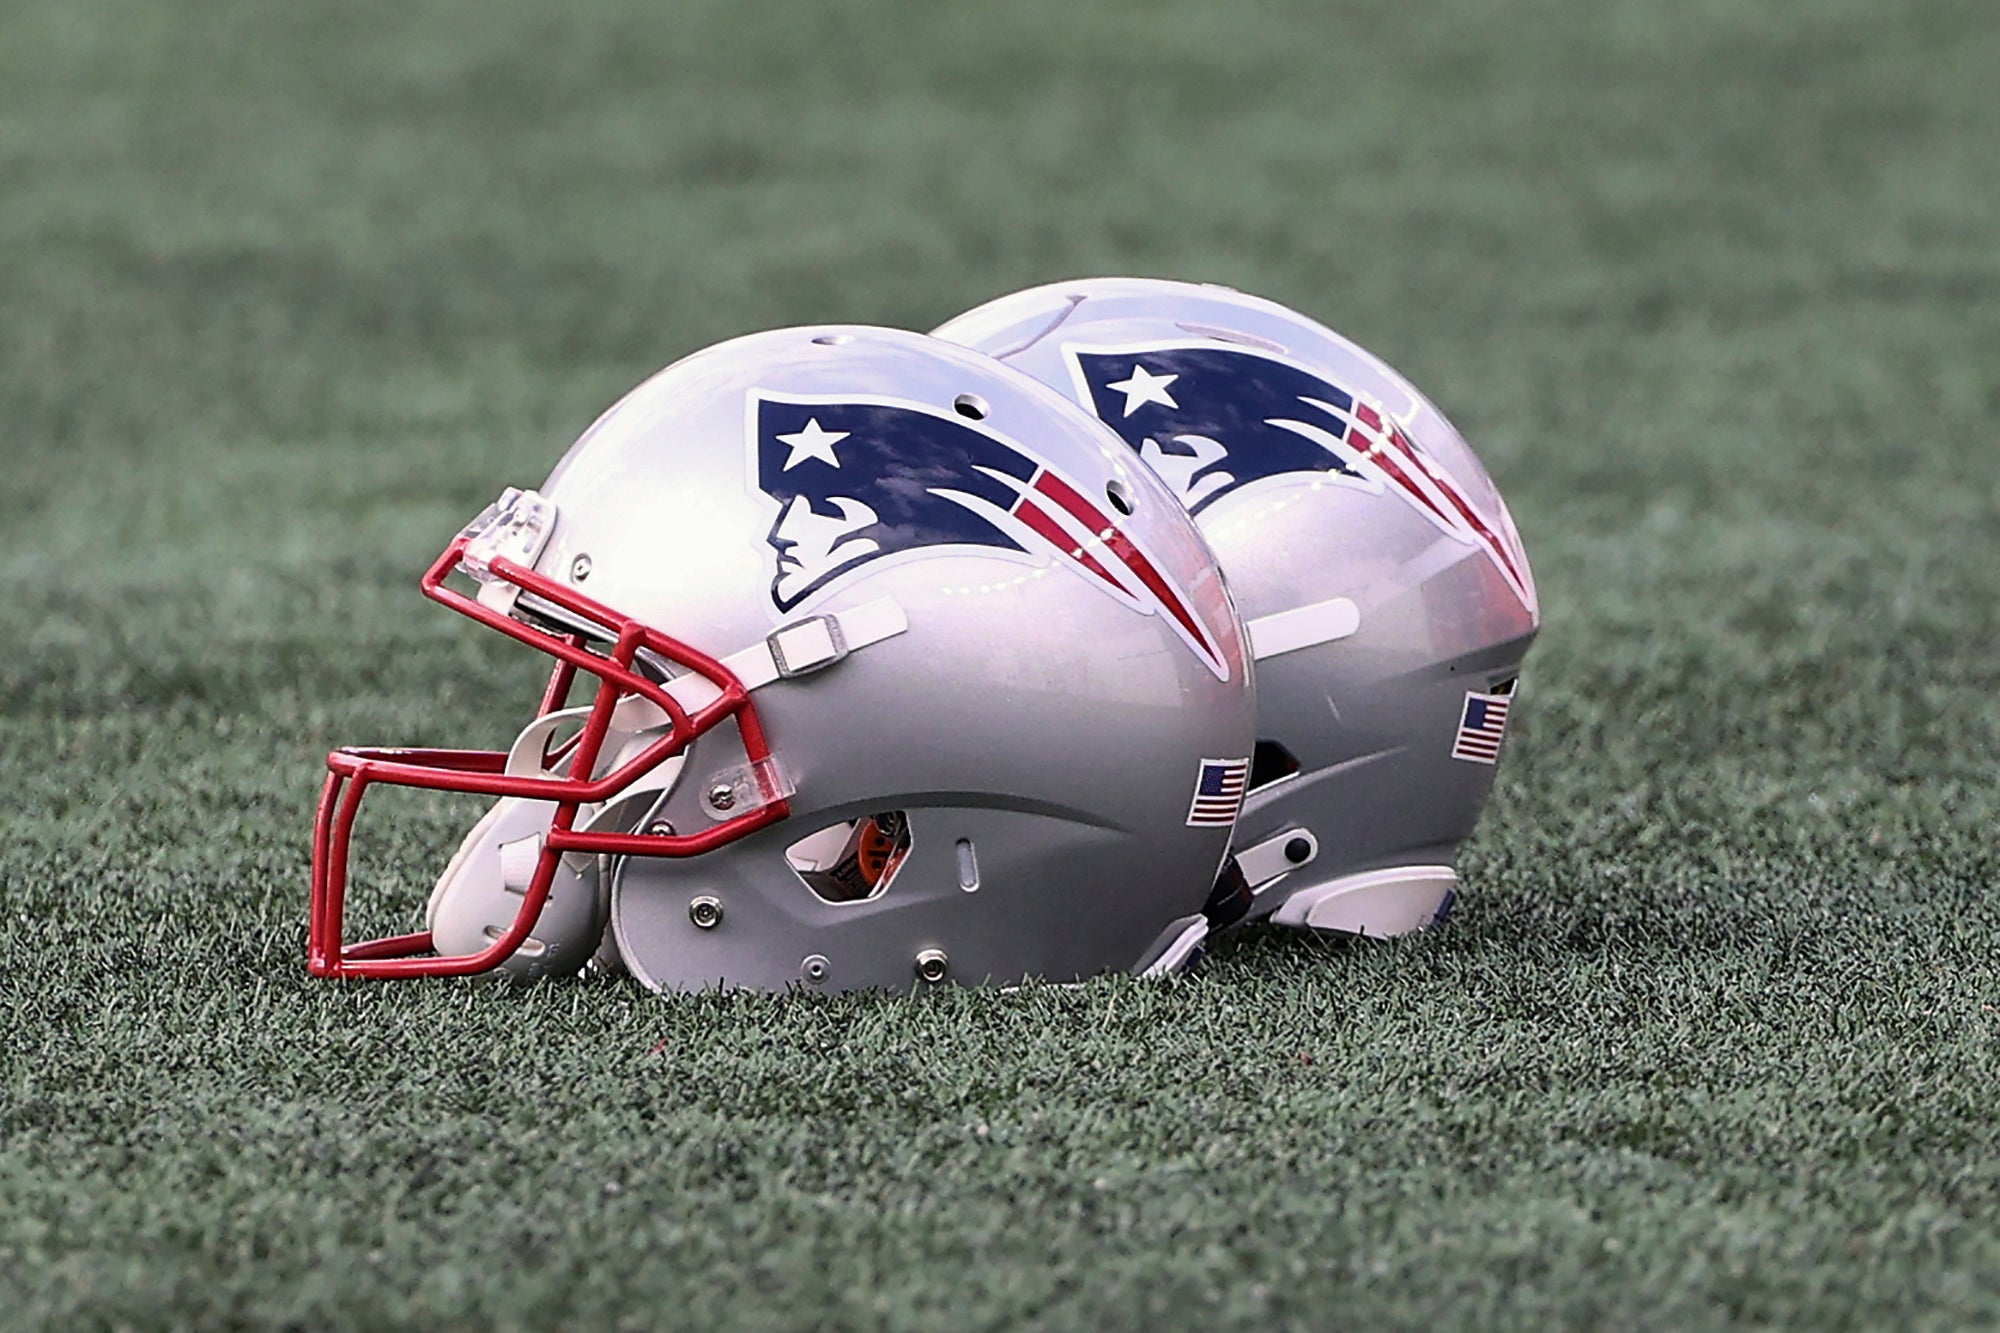 The New England Patriots logo is seen on helmets before the NFL football game between the New England Patriots and the Dallas Cowboys at Gillette Stadium, Sunday, Oct. 17, 2021 in Foxborough, Mass.